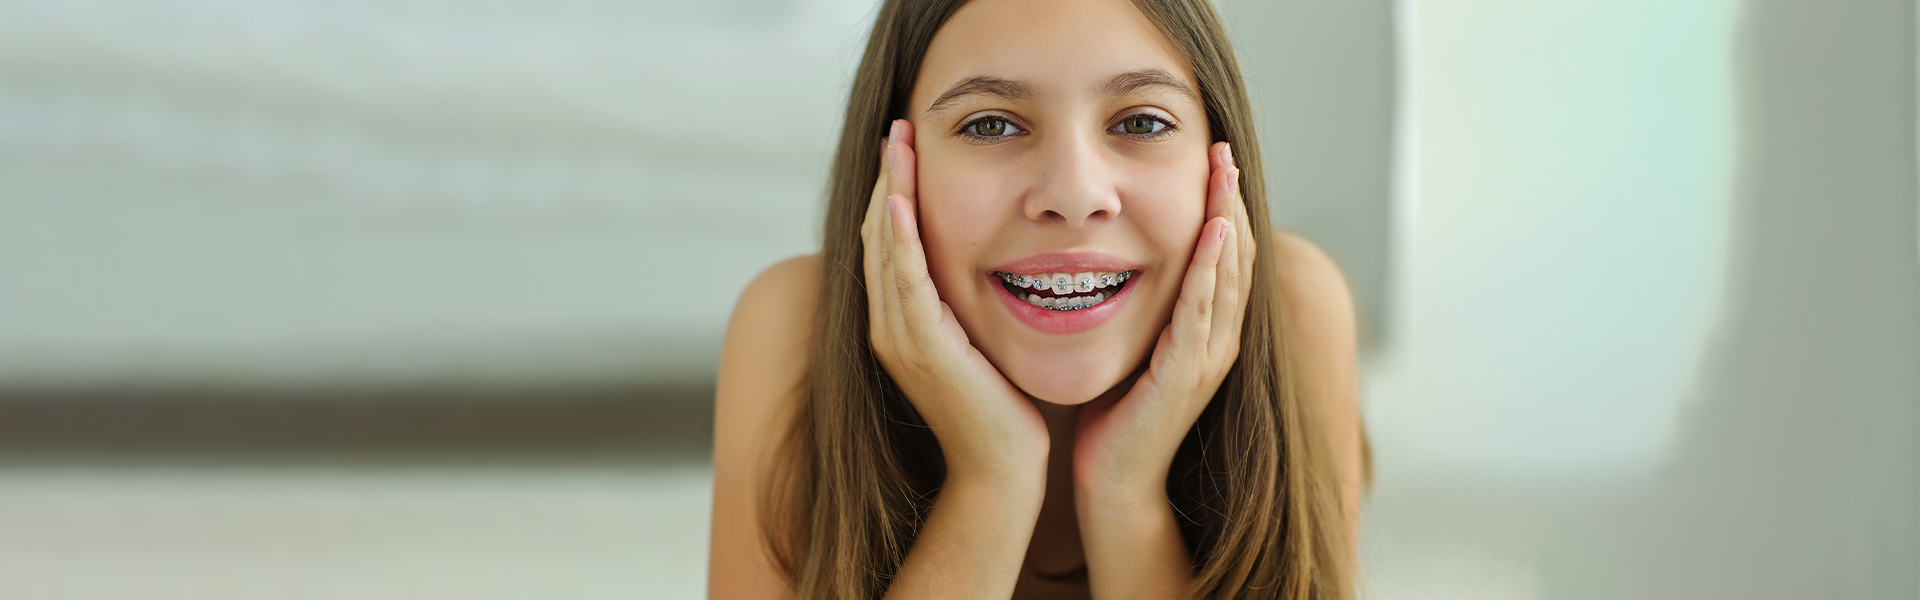 Clear Aligners Vs. Braces: the Pros and Cons